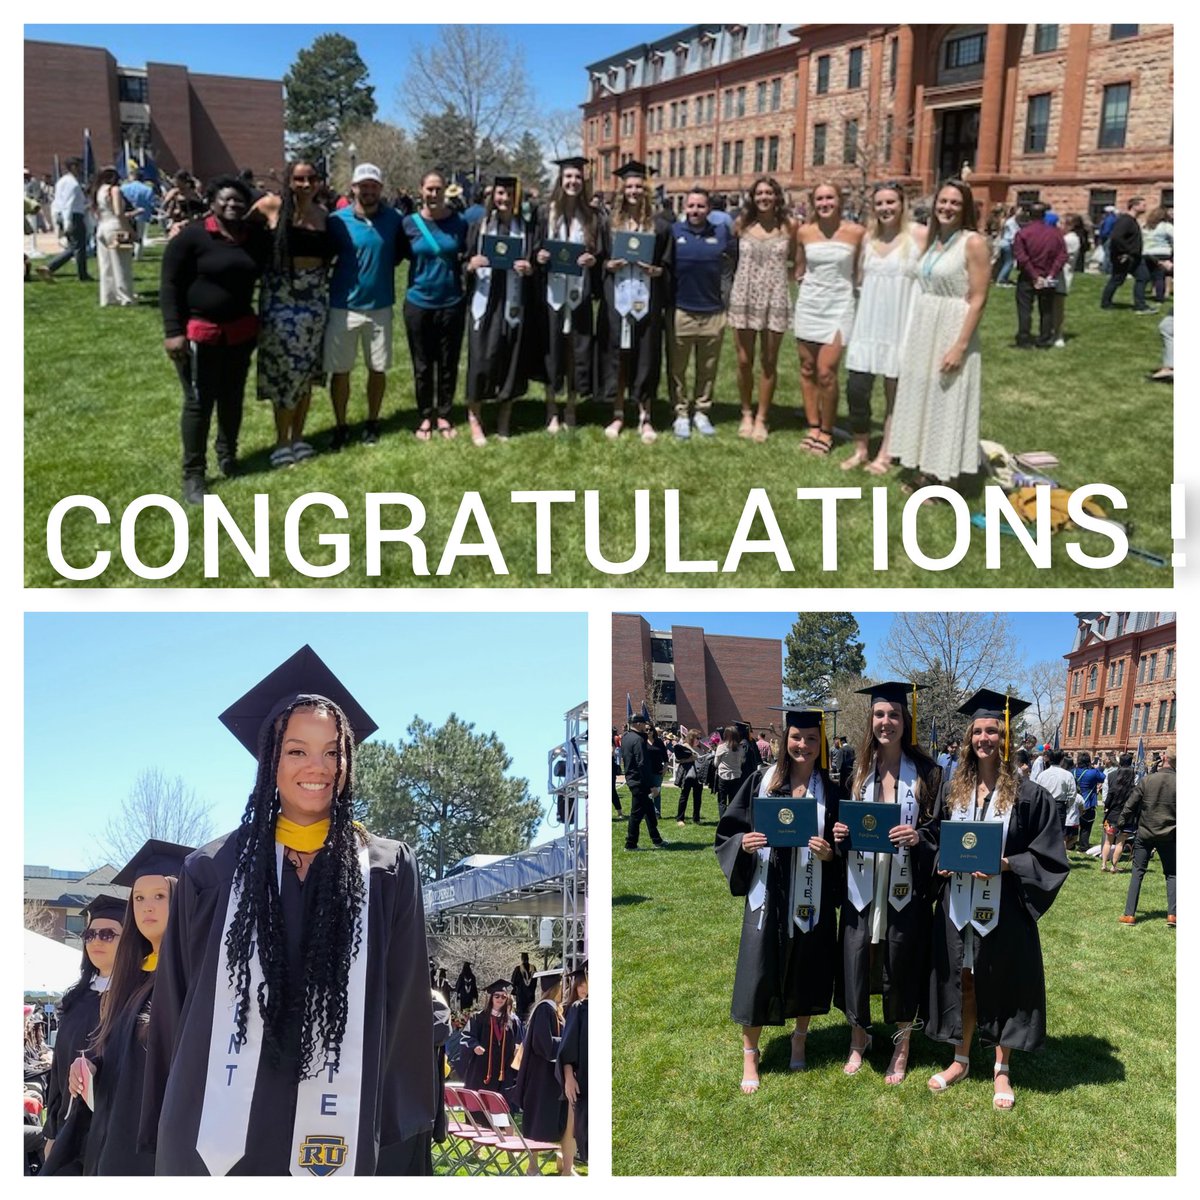 Beautiful weekend in Denver made even better by the graduation of some Rangers!!
@samdeem22 @josey__ryan @SydneySpeights @MSm1th1123 
We are so proud of you all! Can't wait to run it back with these scholarly ballers!
#RangerUp
#Graduated